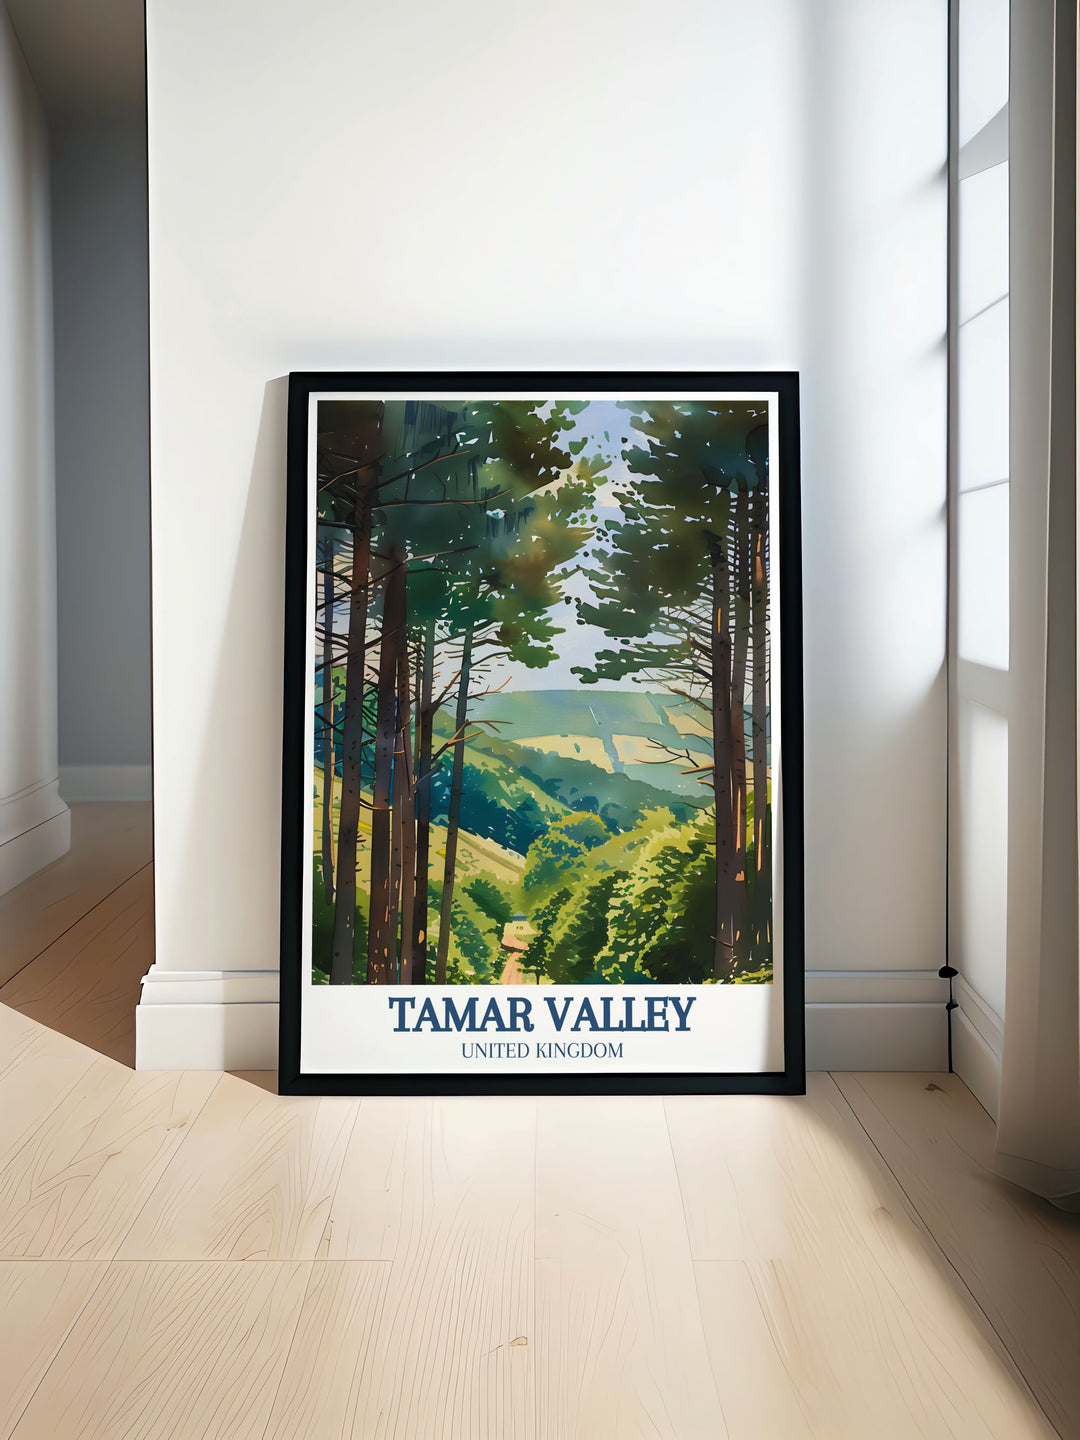 Experience the beauty of Tamar Trails and Kit Hill with this vintage travel print featuring the stunning landscapes of Tamar Valley AONB. Perfect for adding a touch of elegance to your home decor and a must have for nature lovers and art enthusiasts.